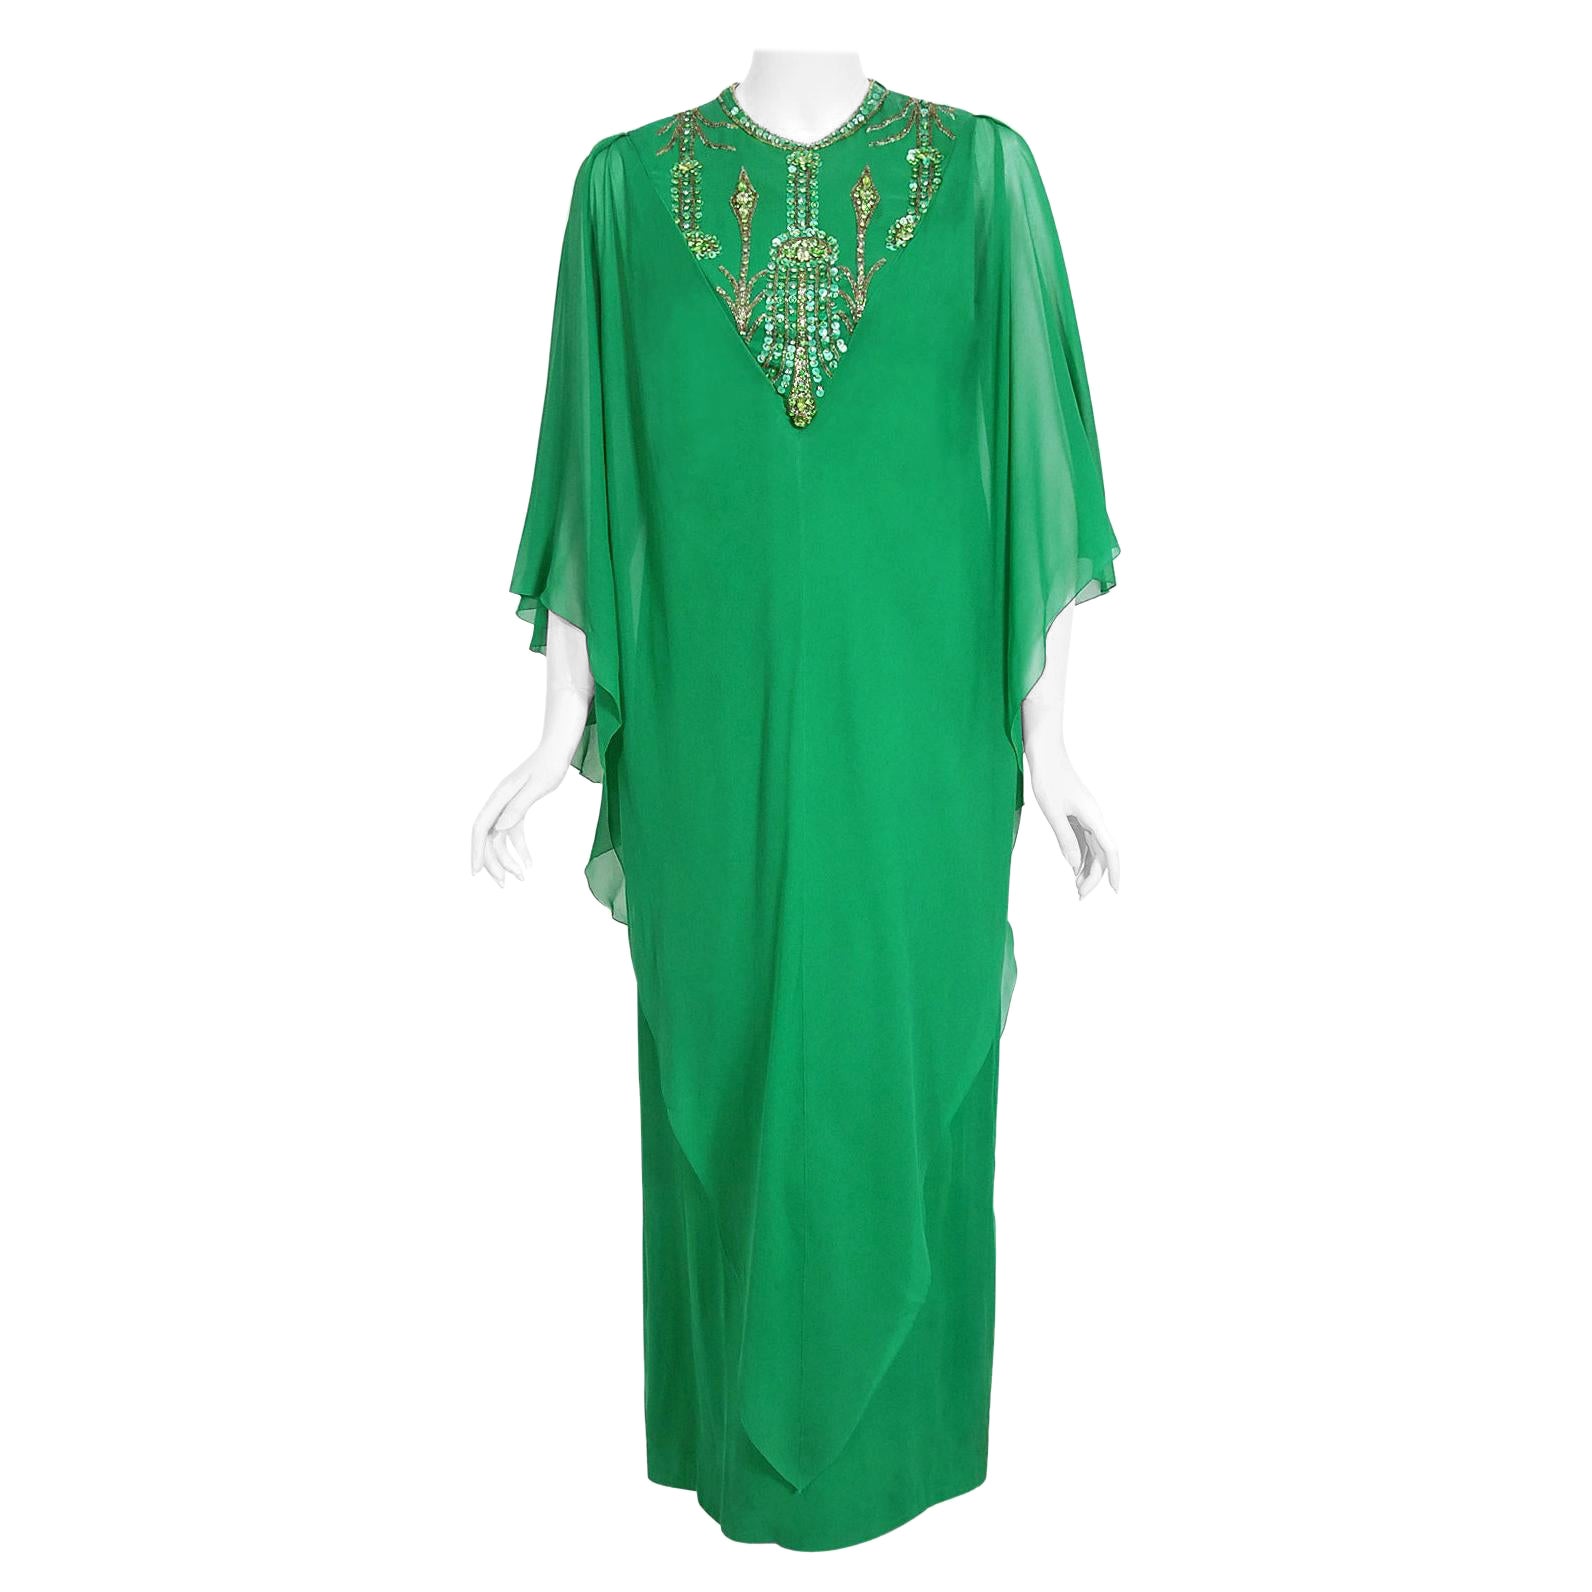 Vintage 1965 Pierre Cardin Haute Couture Beaded Green Silk Chiffon Caftan Gown For Sale